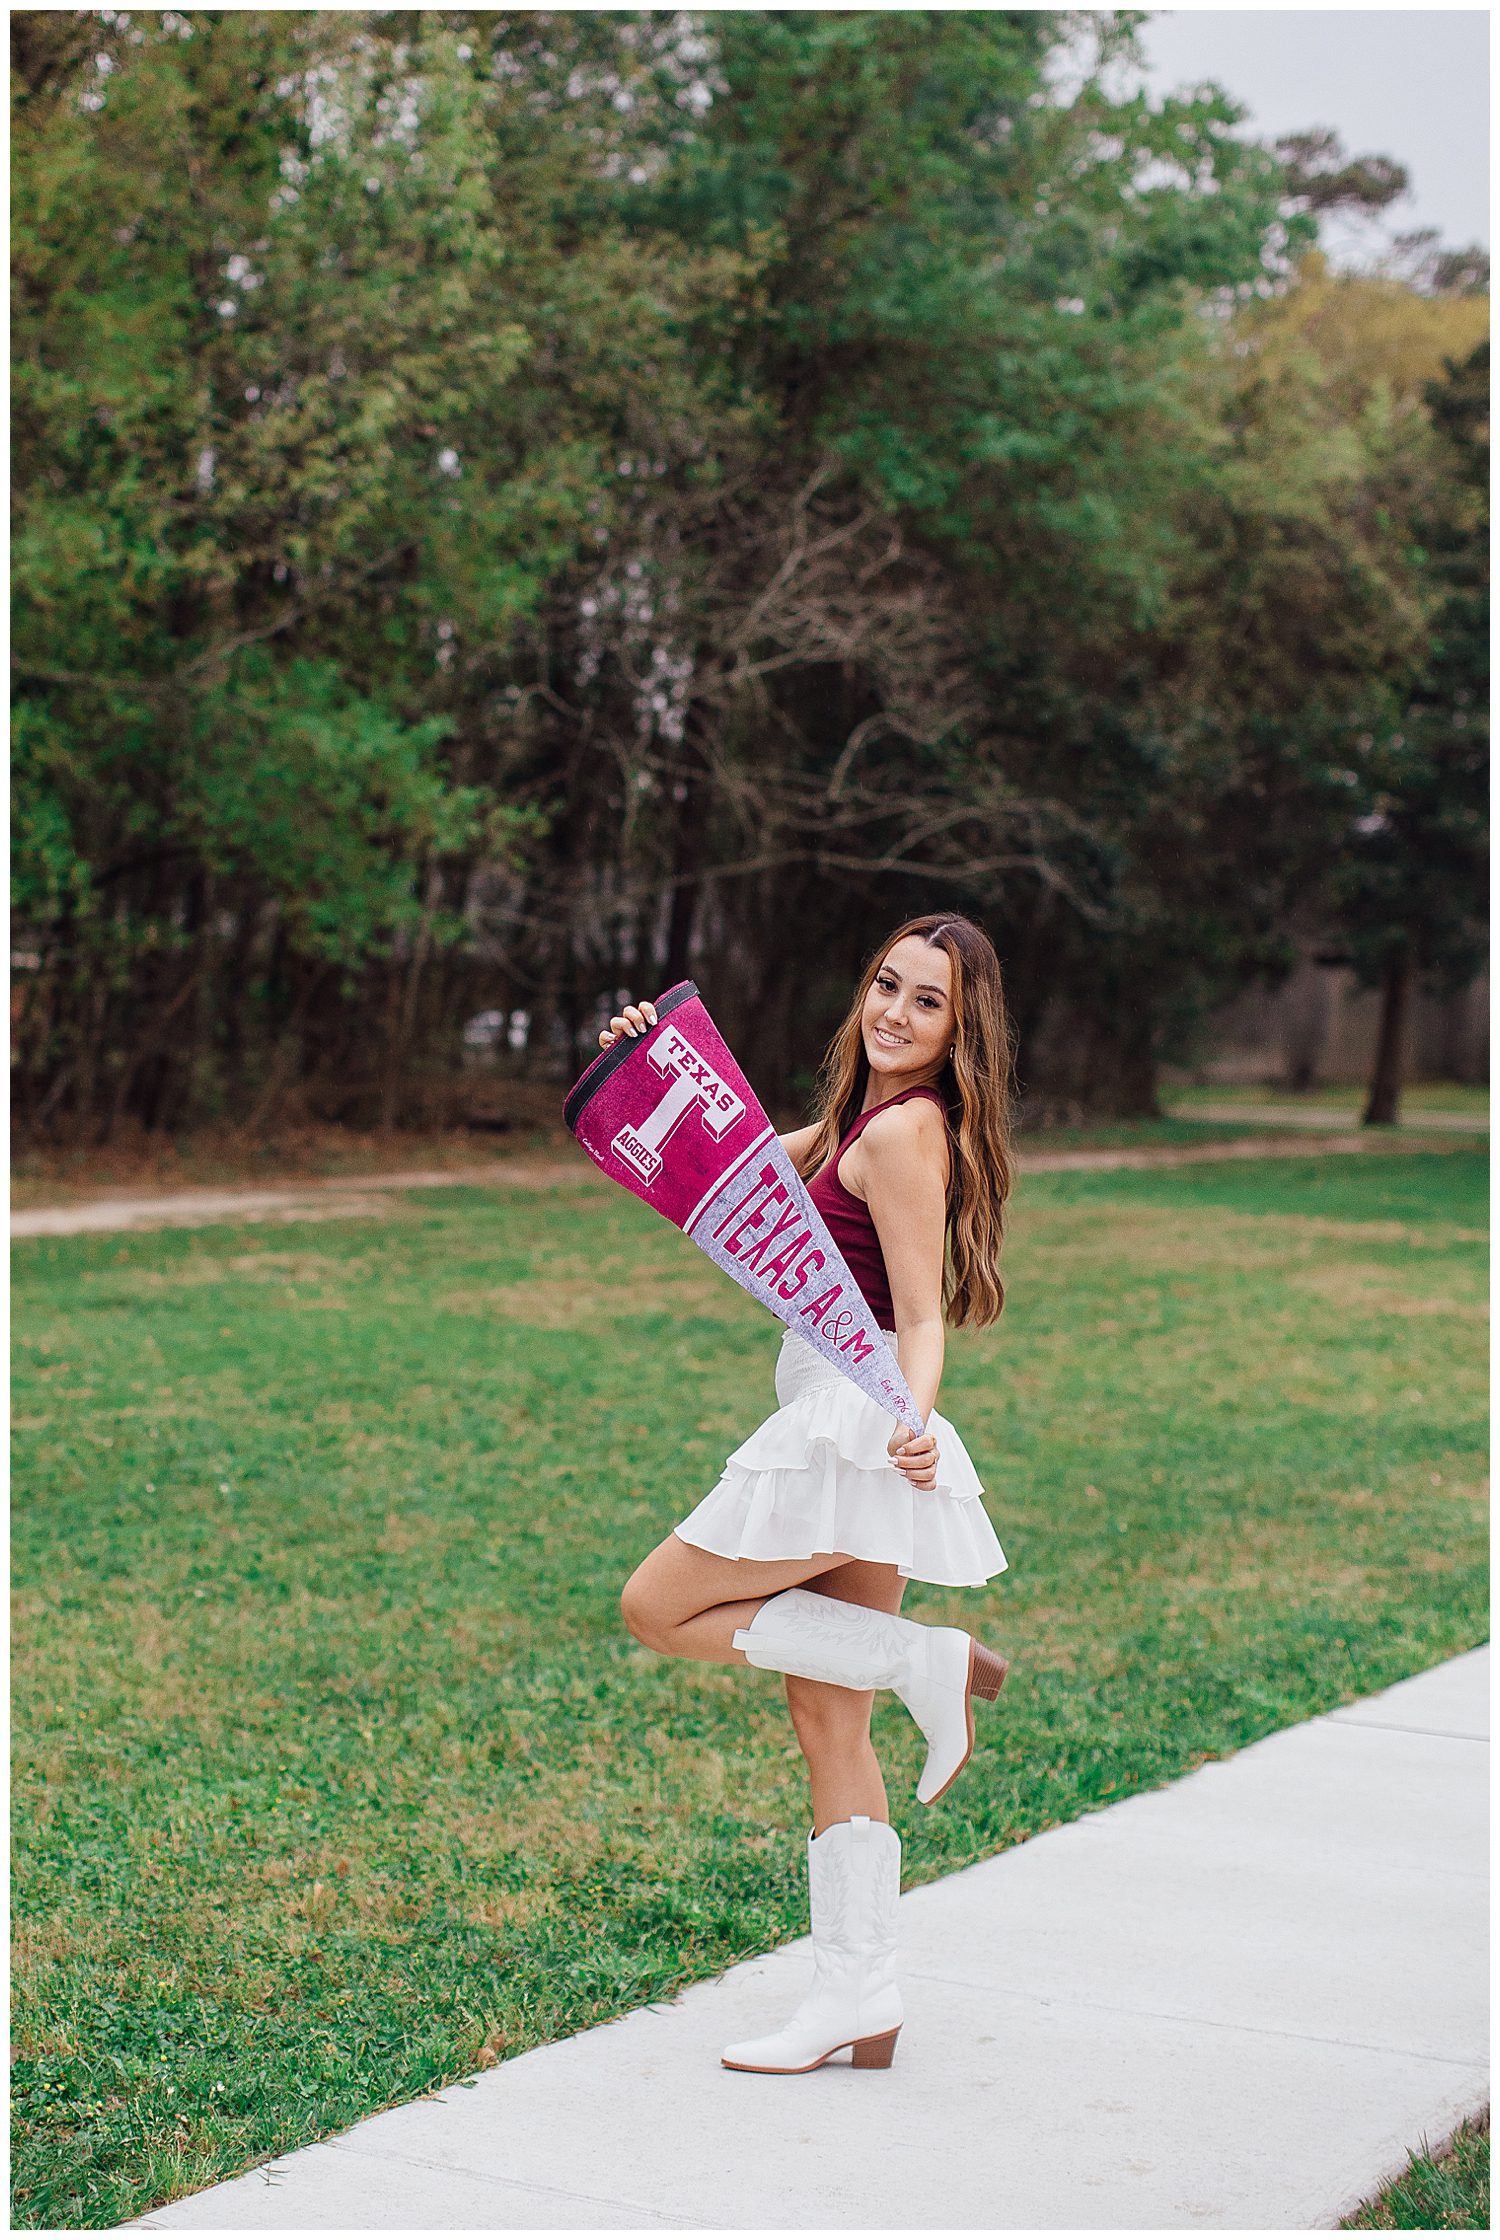 high school senior girl with white boots and skirt and maroon shirt holding Texas Aggie sign in a Houston field